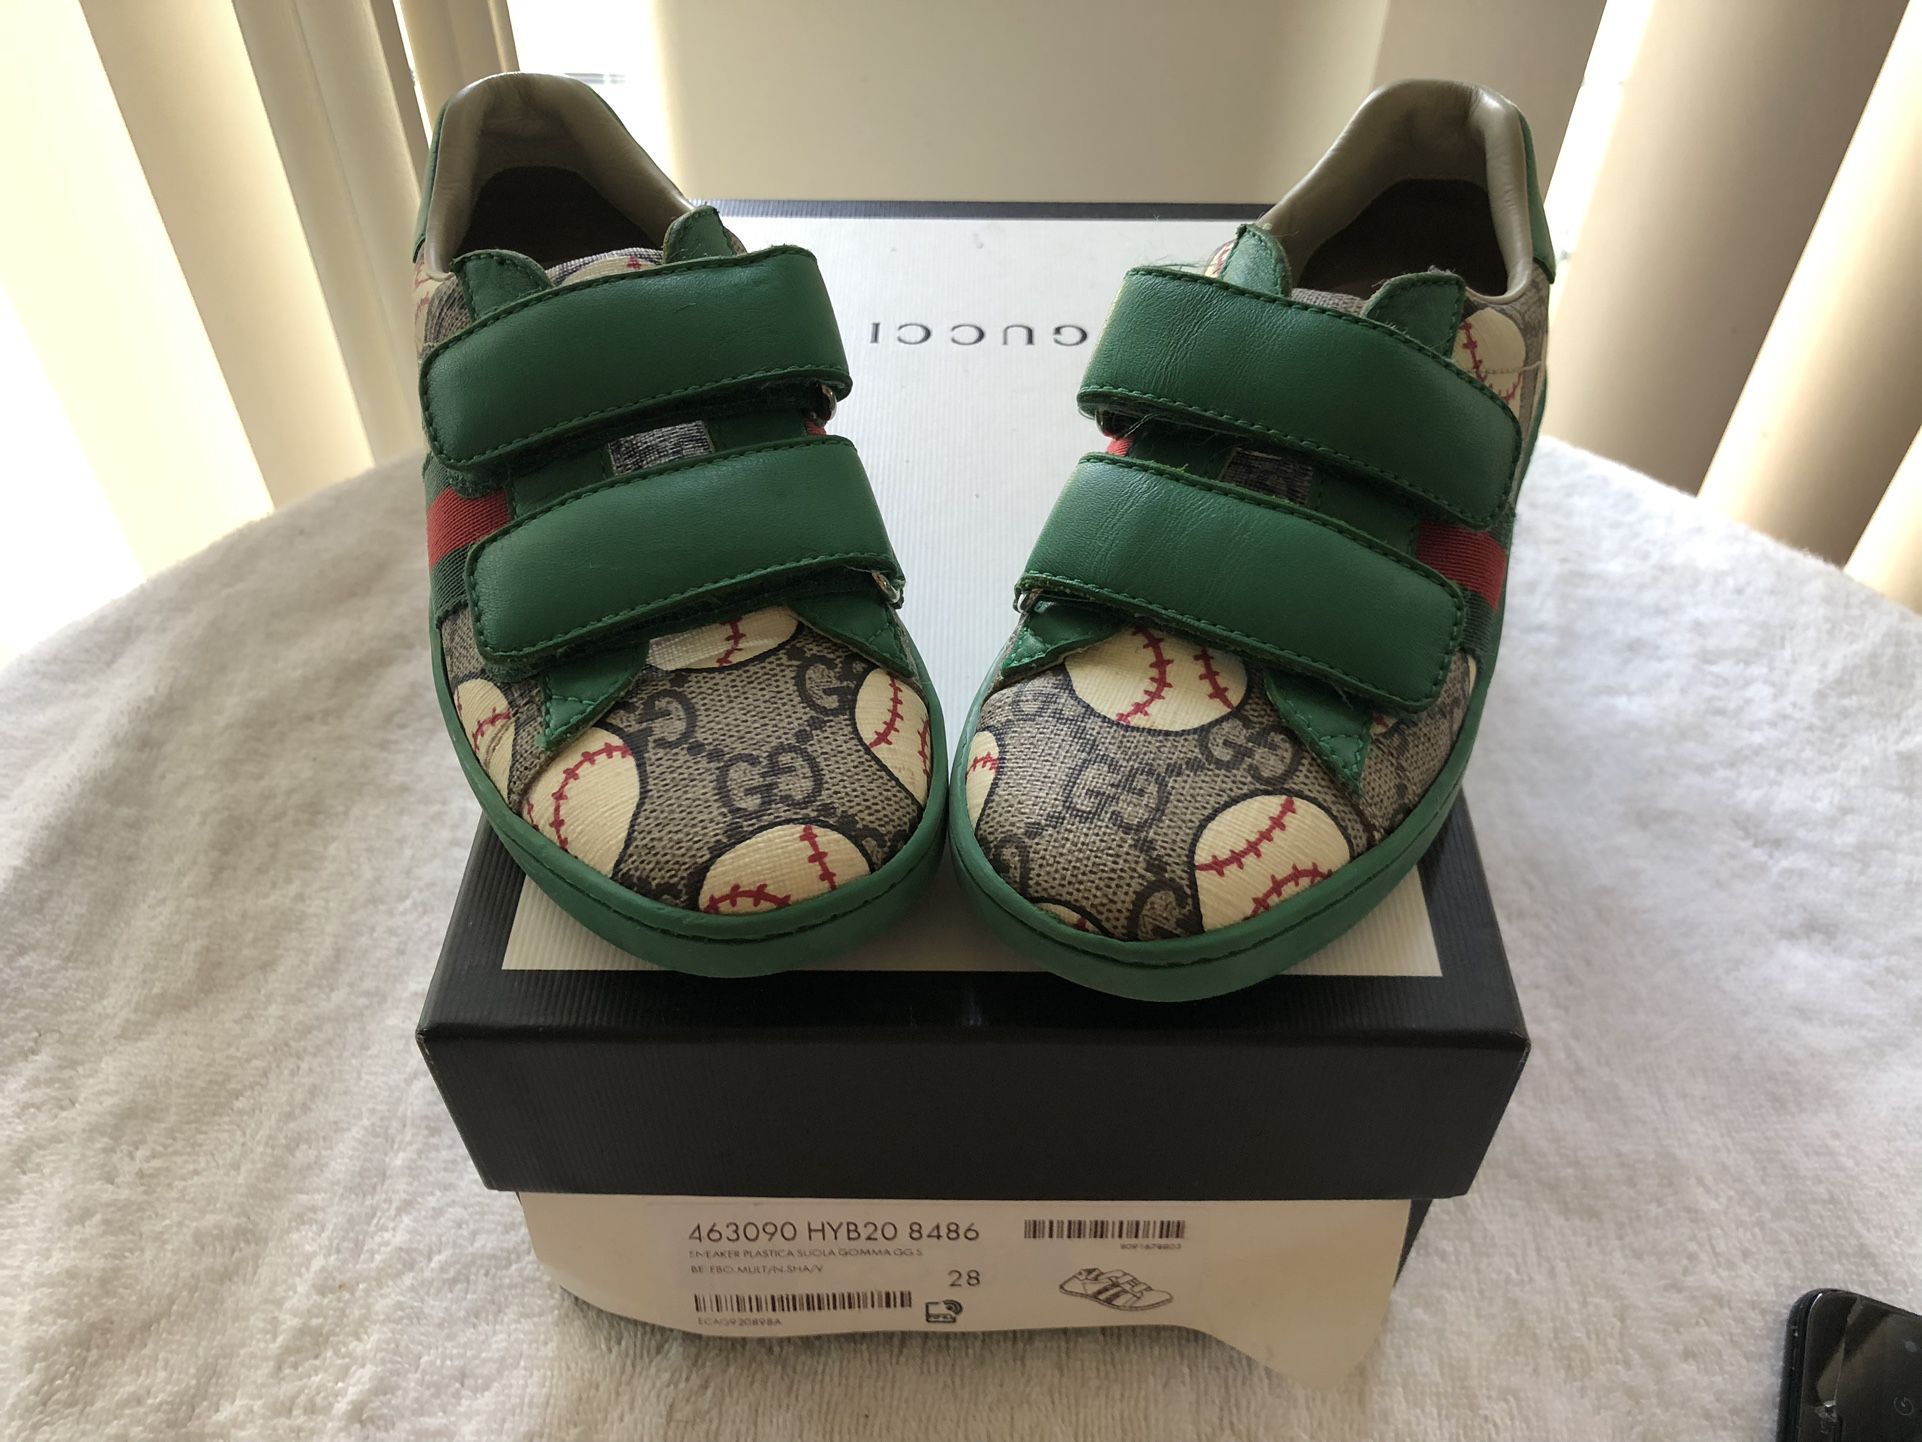 Gucci Shoes Toddlers Size 28 Excellent Condition 